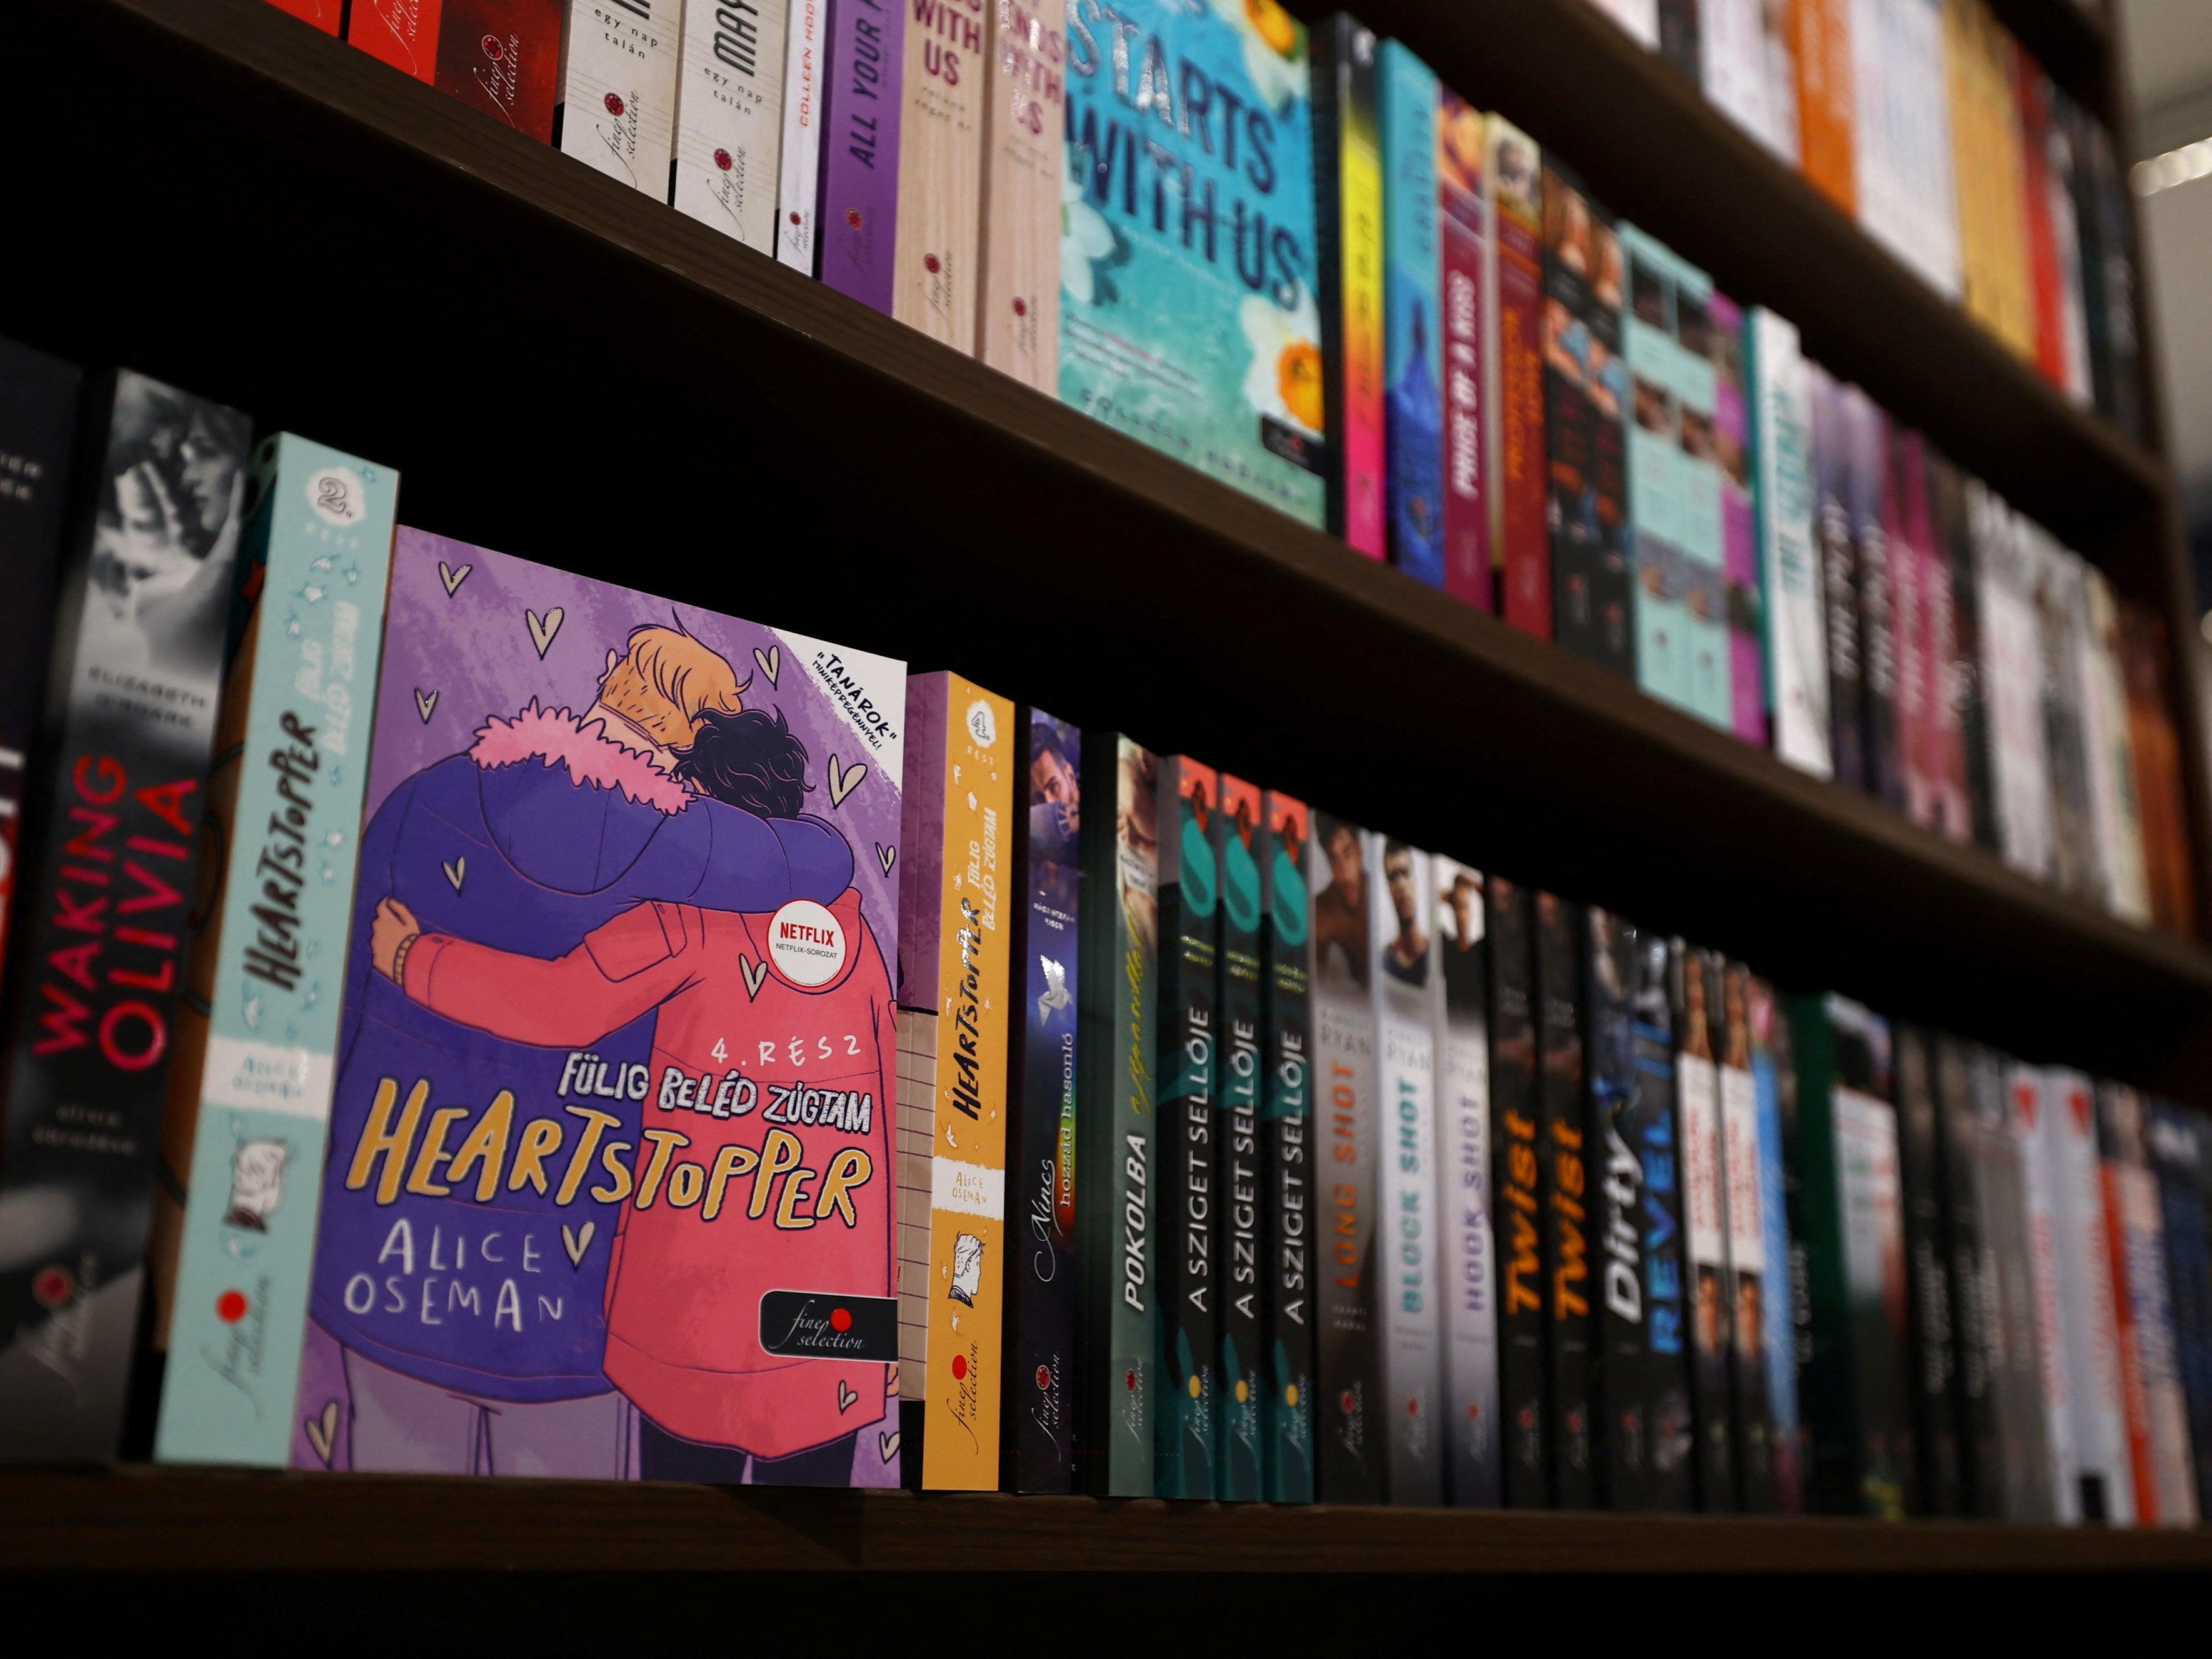 A copy of Alice Oseman’s ‘Heartstopper’ is displayed in Lira in Budapest